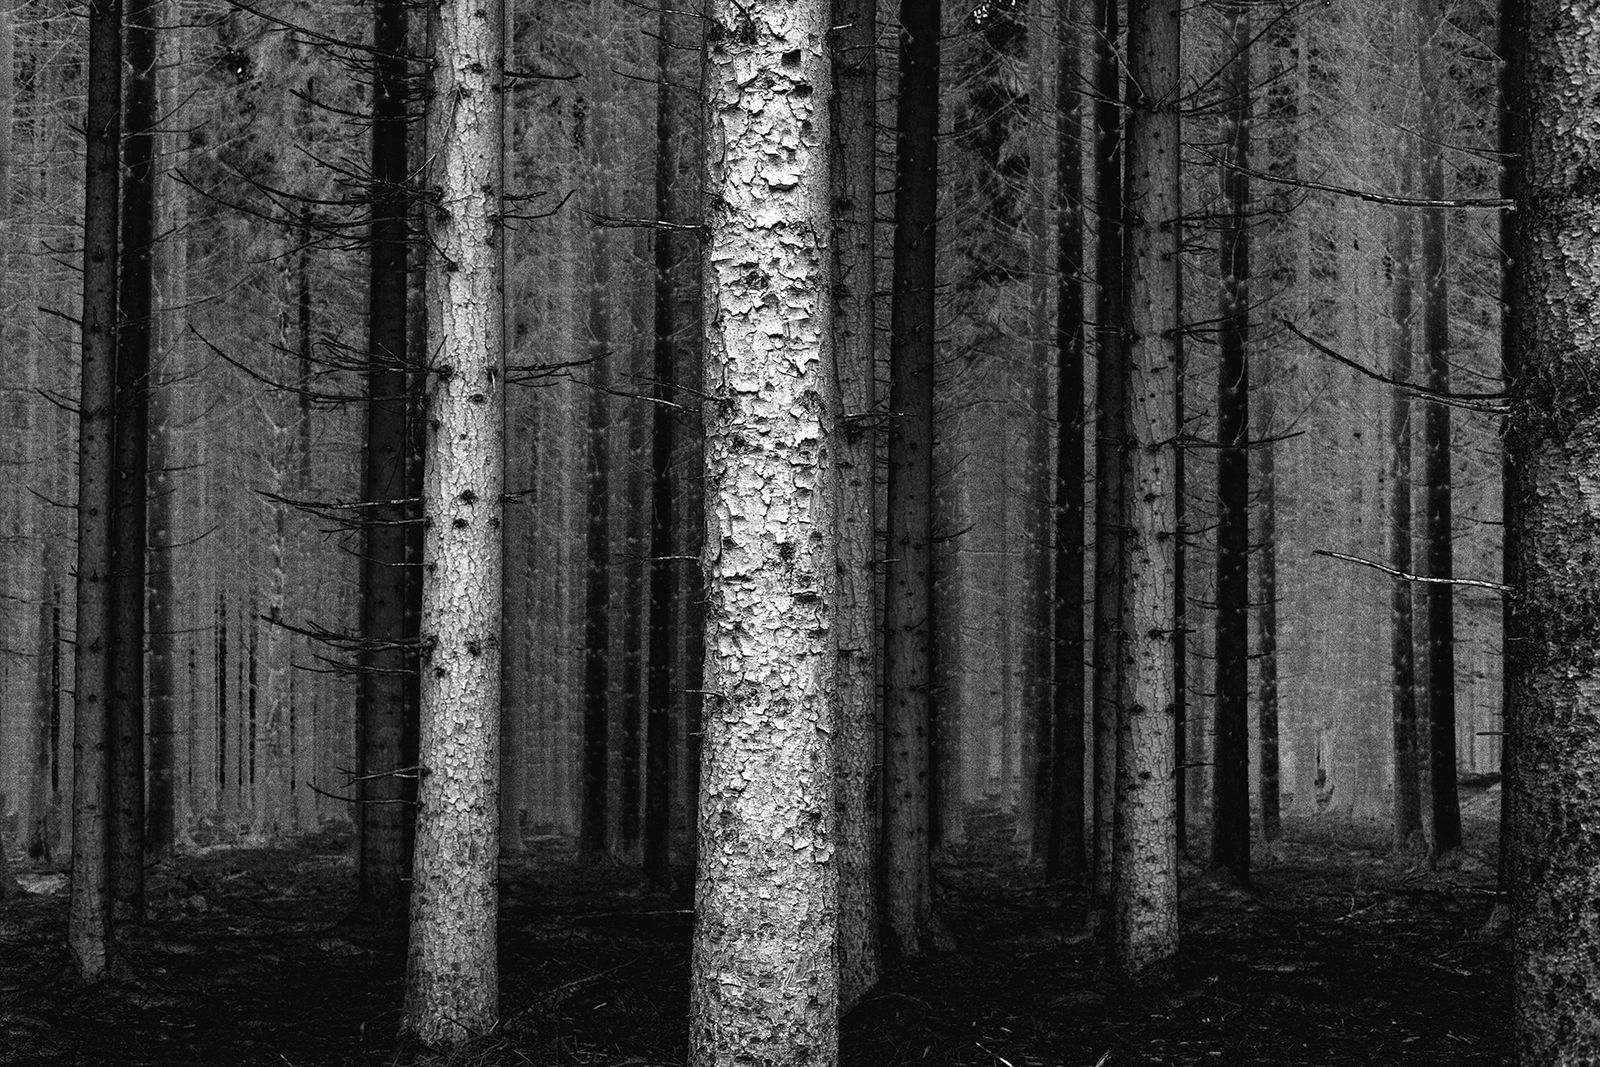 © Nanouk Prins - Image from the Empty Forest photography project